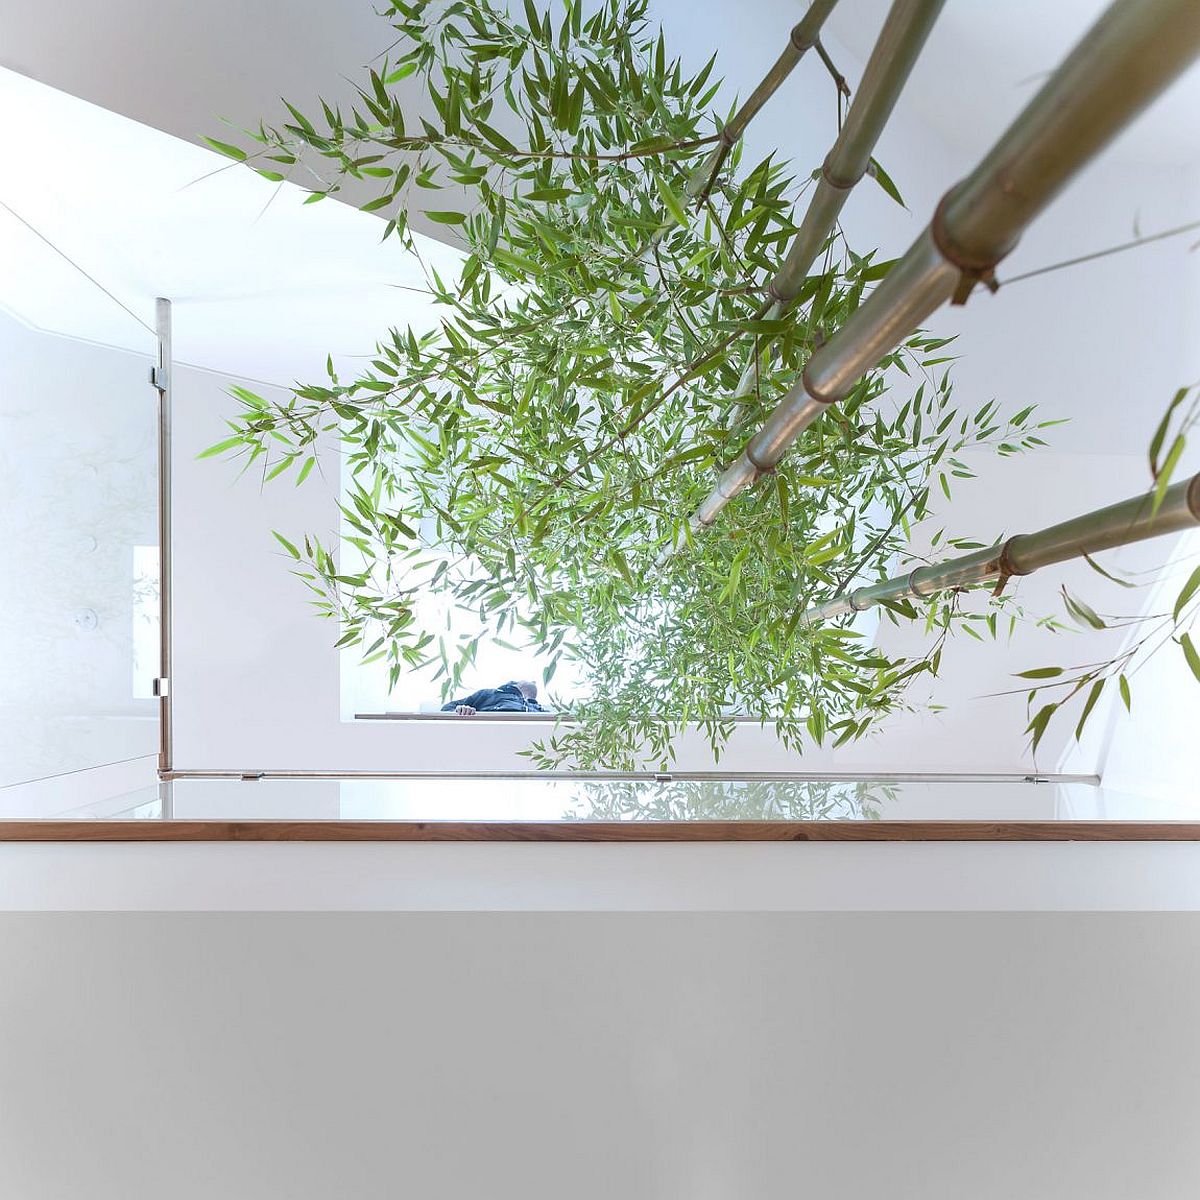 Indoor bamboo garden at the modern residence in Vancouver